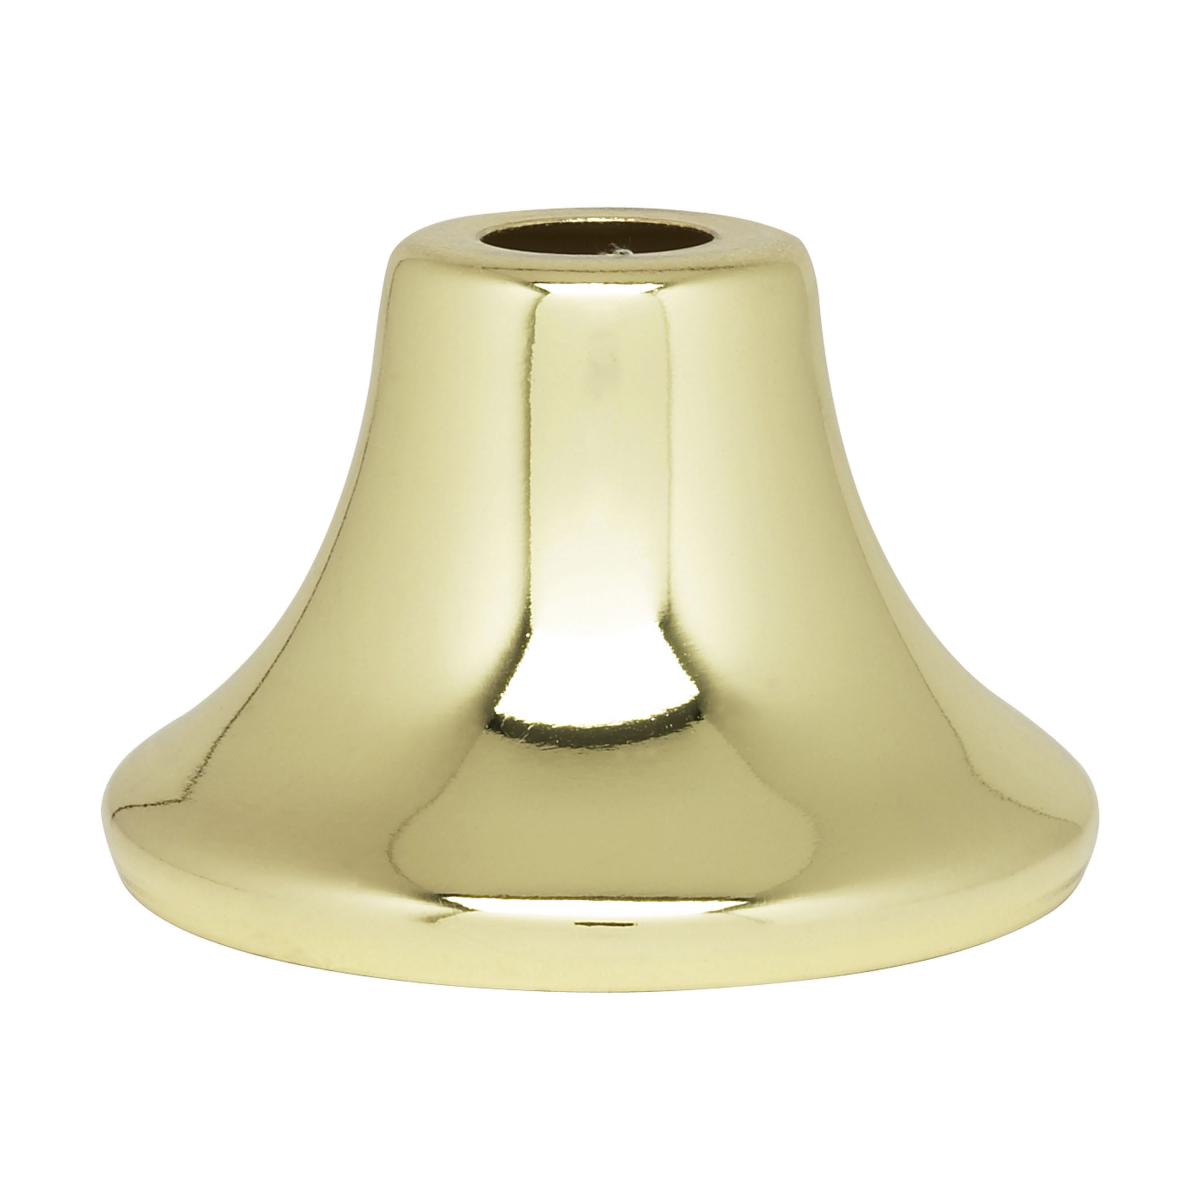 Satco 90-2188 Flanged Steel Neck 7/16" Hole 1-3/16" Height 3/4" Top 1-3/4" Bottom Seats Brass Plated Finish